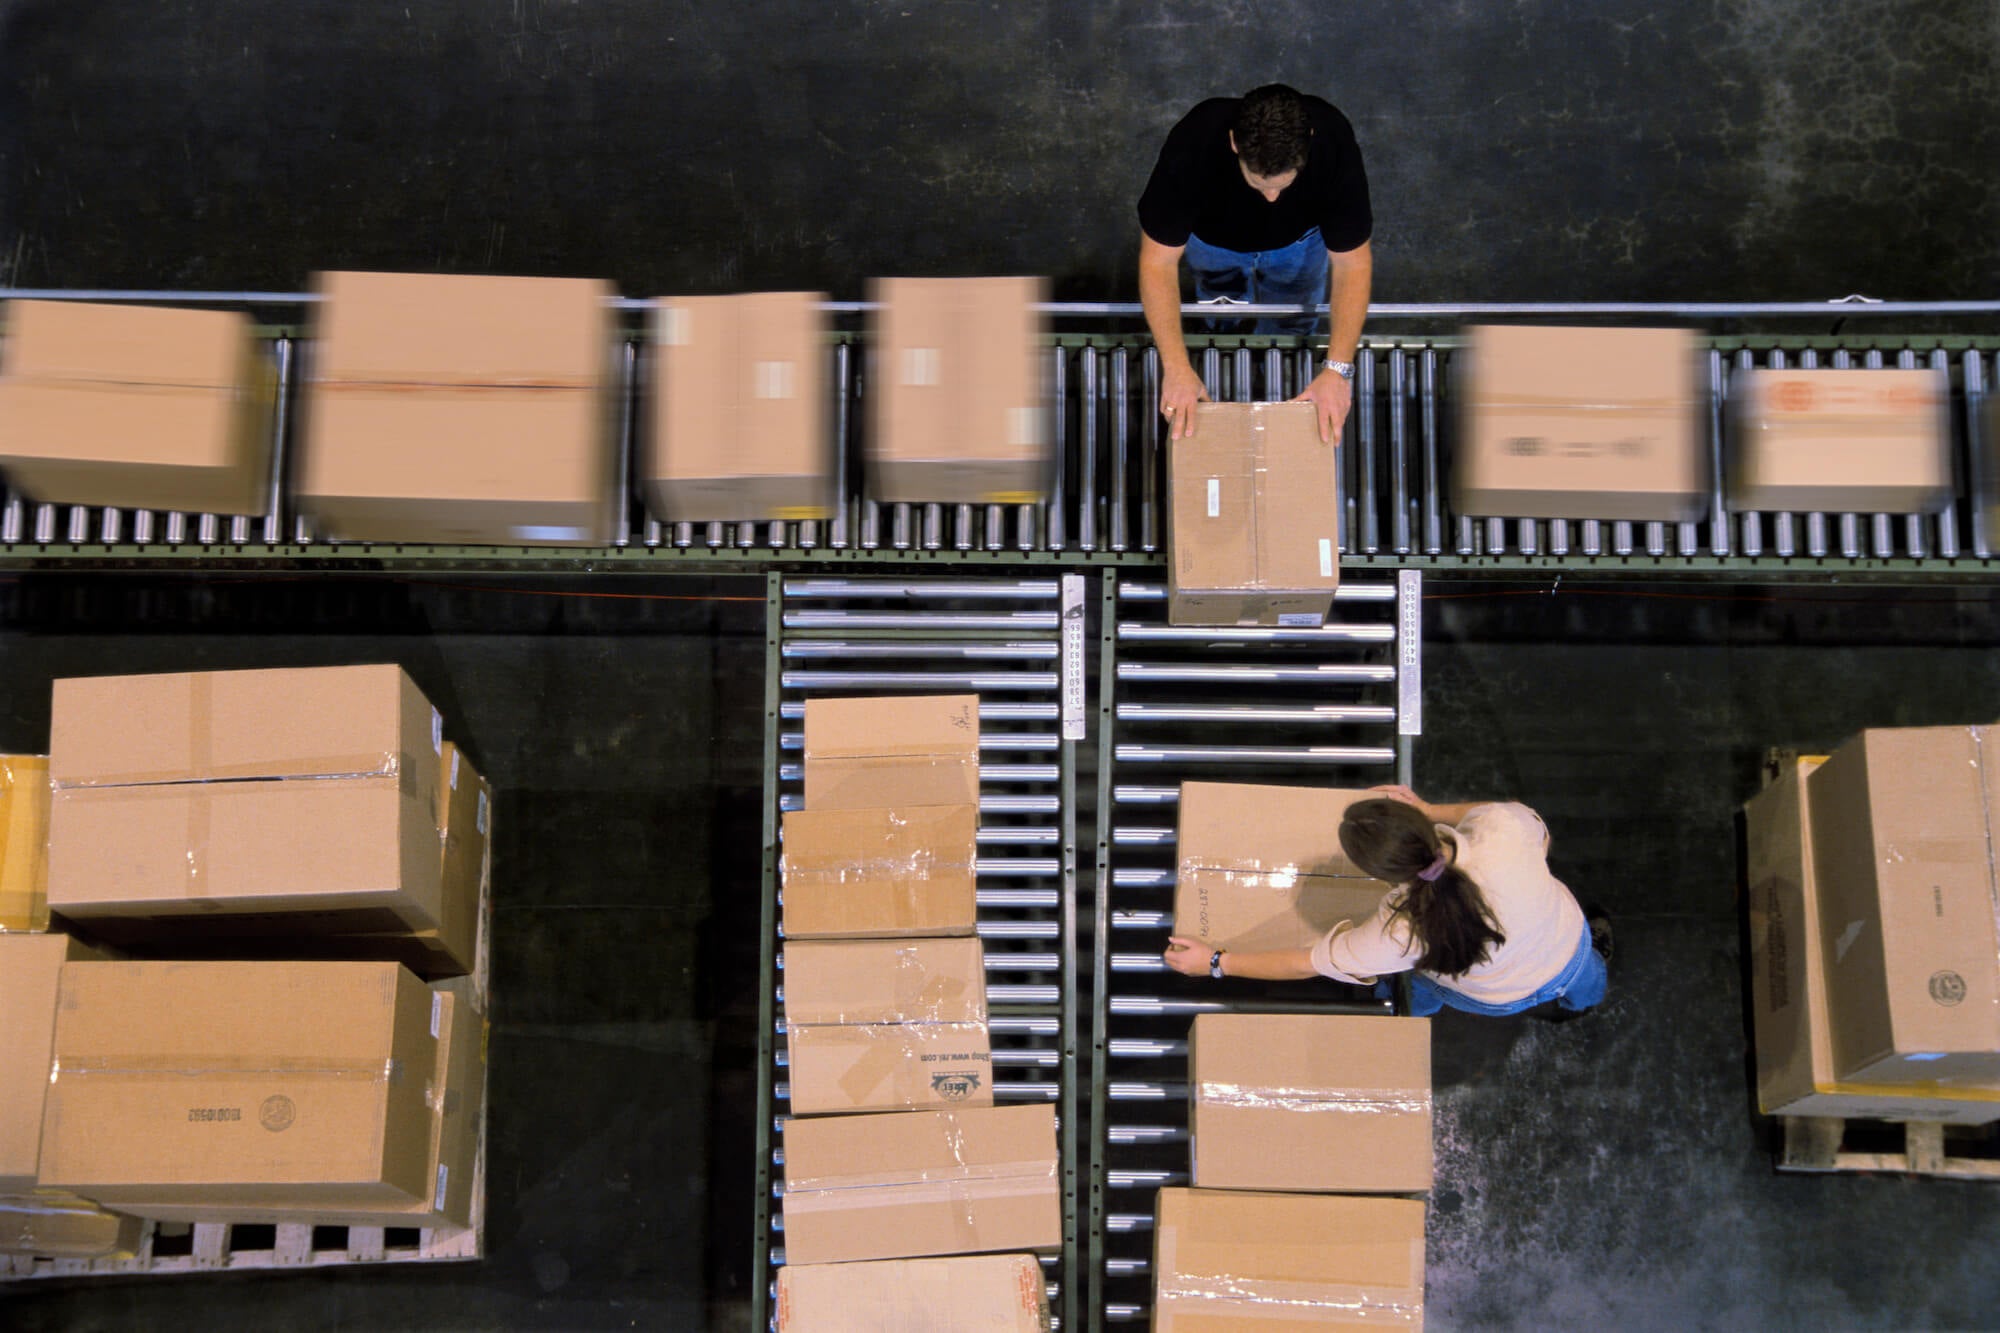 Packages moving in warehouse conveyor belt